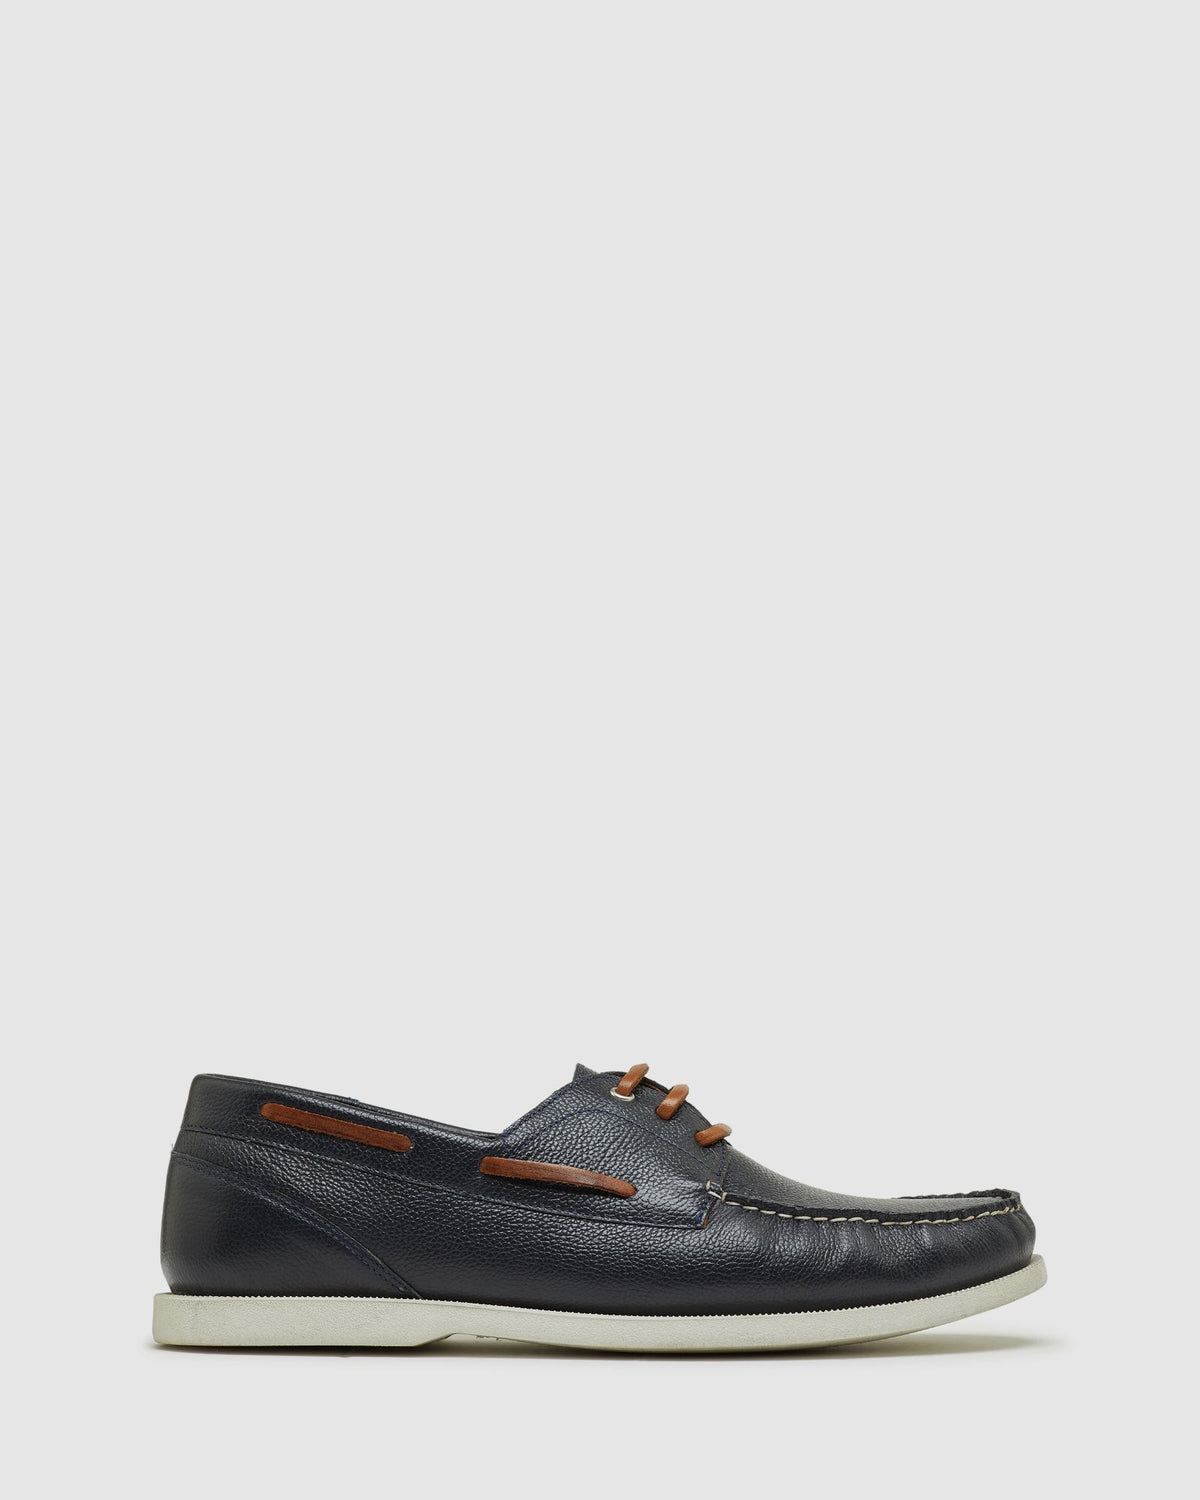 ZALE LEATHER BOAT SHOES